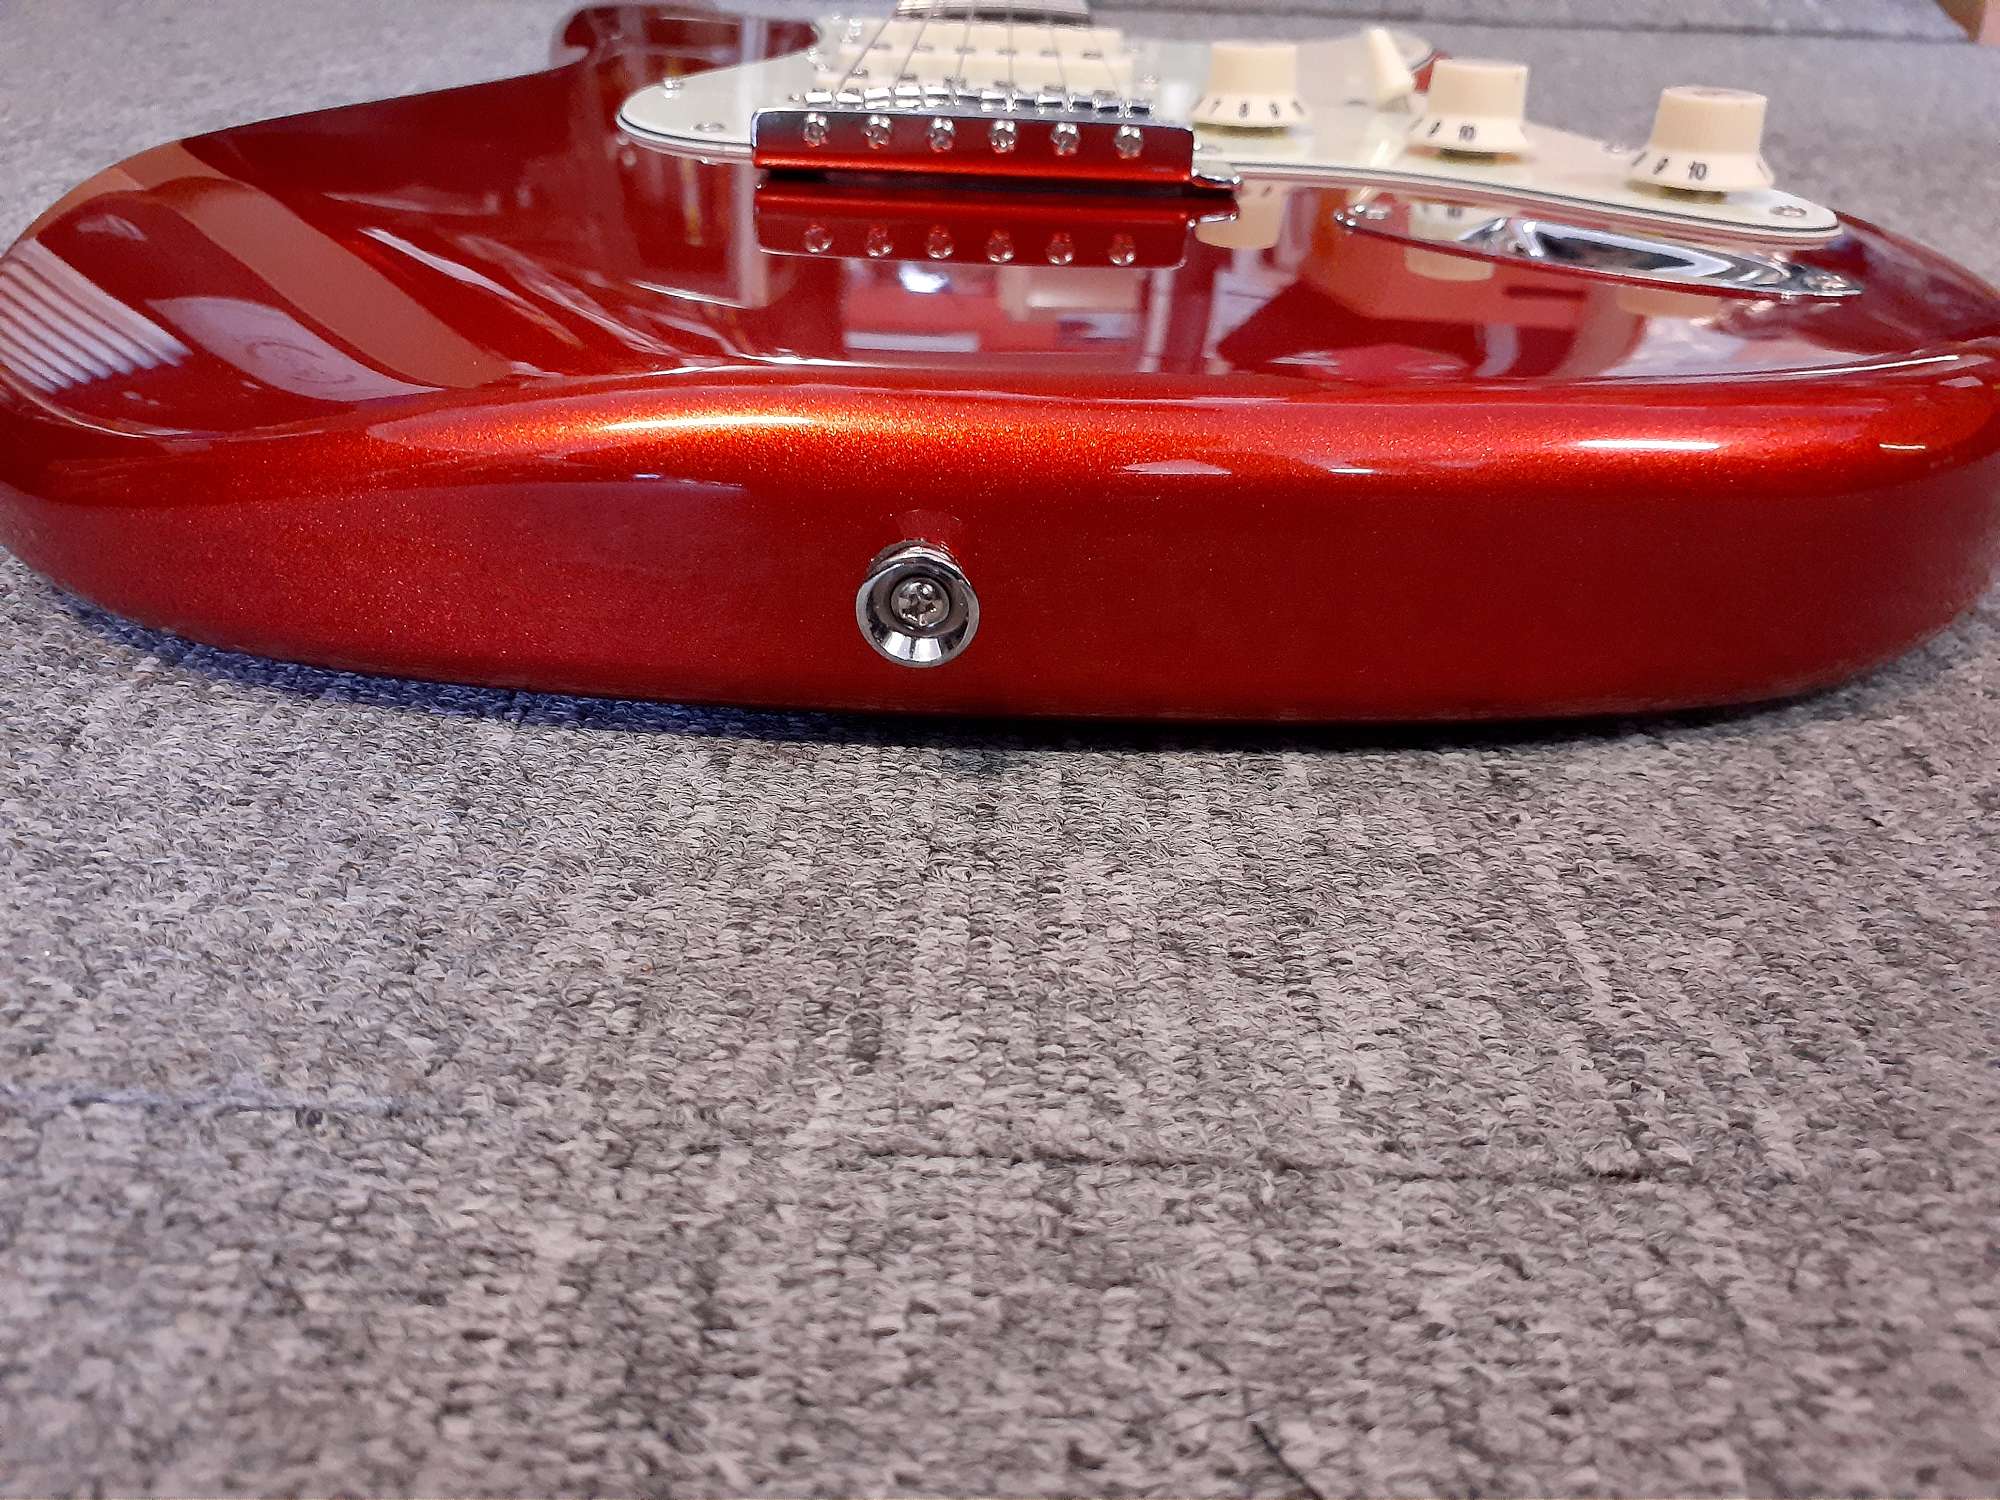 SX SST62+ 3/4 Size Electric Guitar Candy Apple Red 